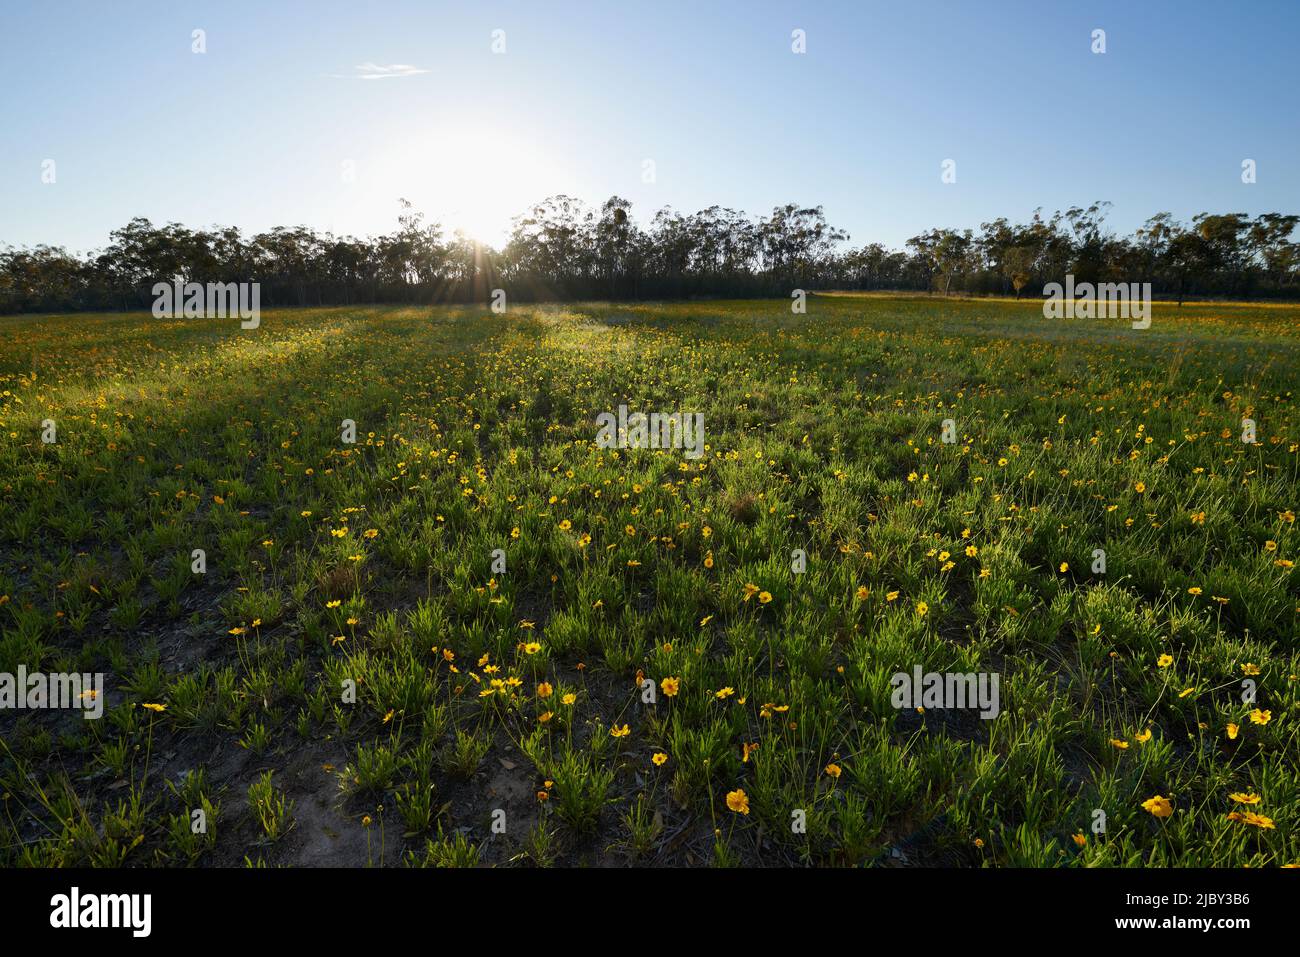 Afternoon sun shining on field of yellow flowers Stock Photo